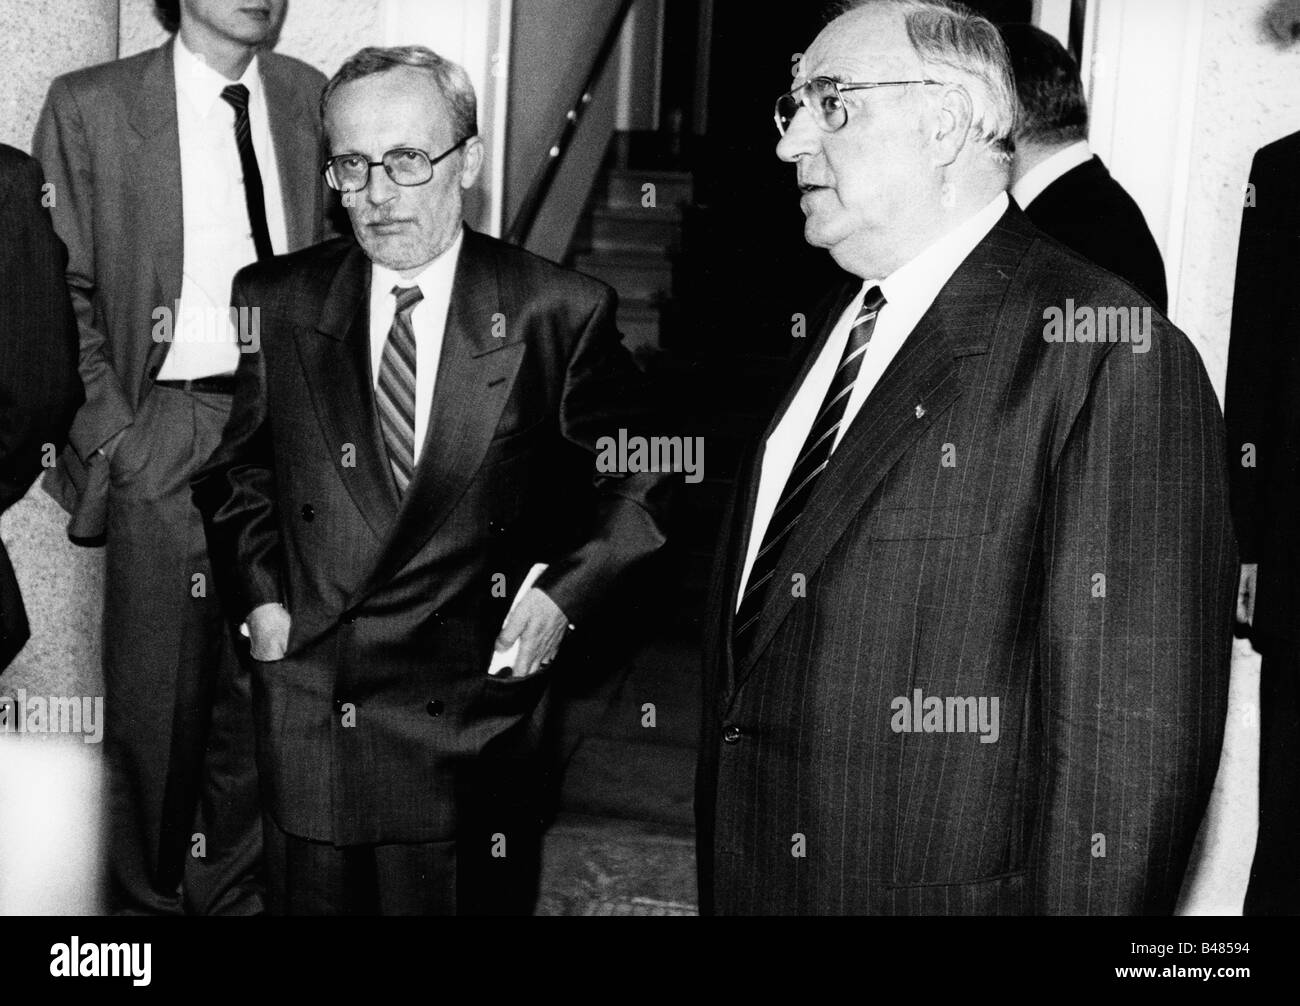 Kohl, Helmut, * 3.4.1930, German politician (CDU), chancellor of Germany 1982 - 1998, half length, with Primeminister of GDR Lothar de Maiziere, 1990, Stock Photo